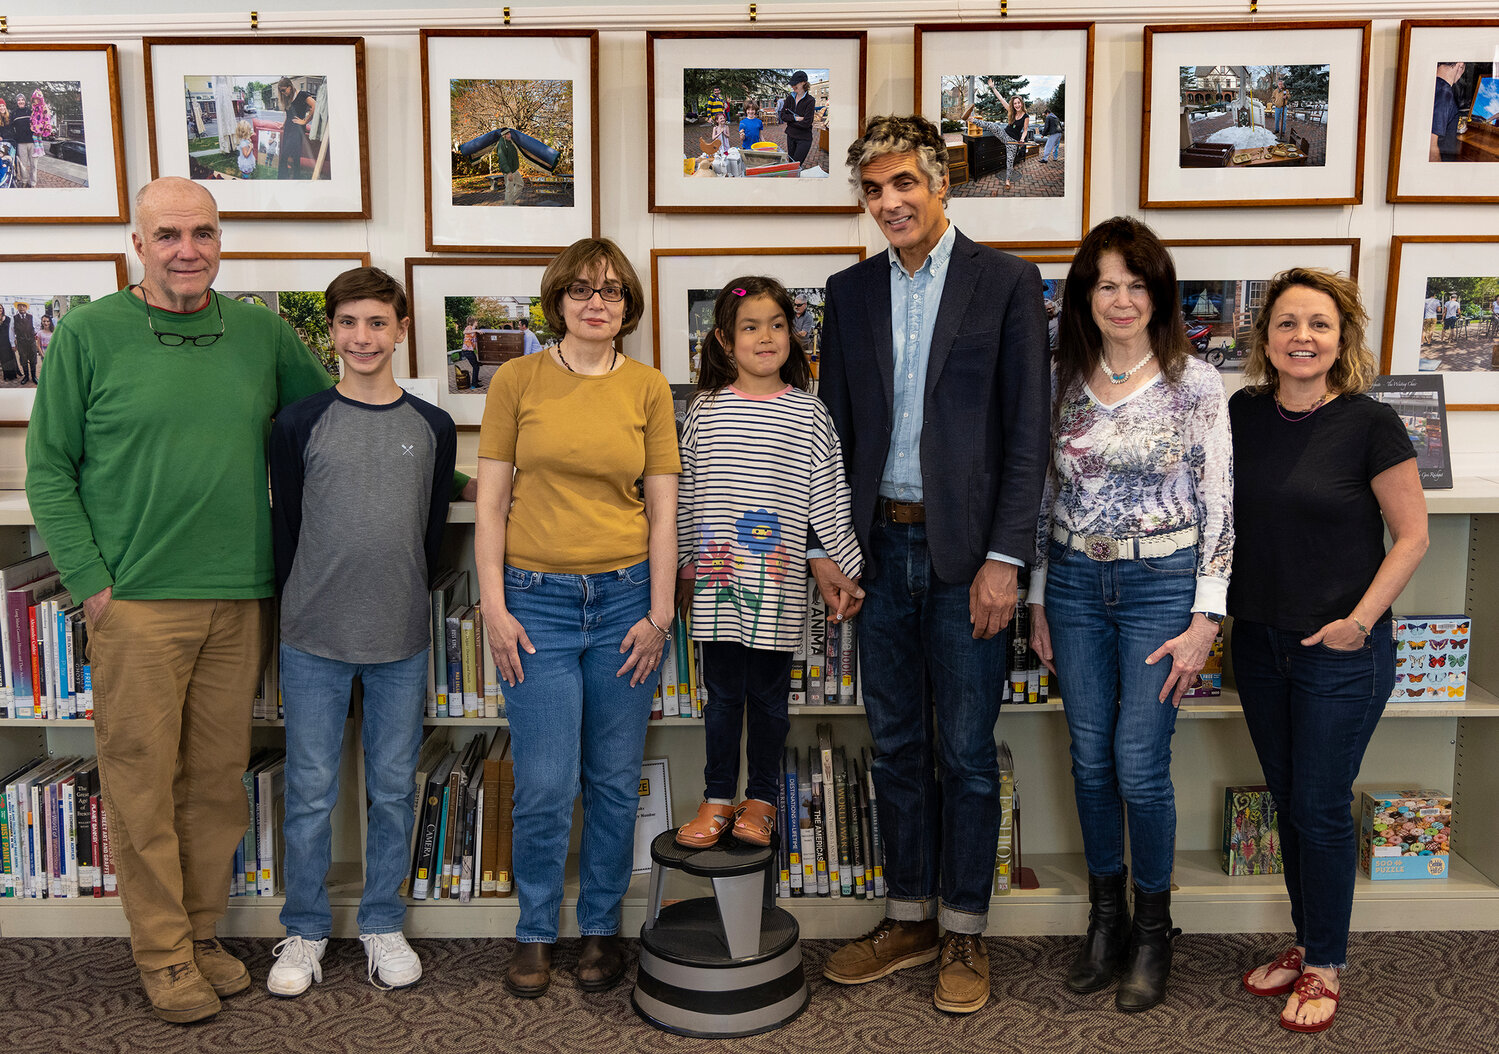 Mike Lennon, far left, Dominic Johnson, Camille Purcell, Madeline Redenti, Stephen Redenti, photographer Geri Reichgut and Kathleen DiResta came together to memorialize the new exhibition.